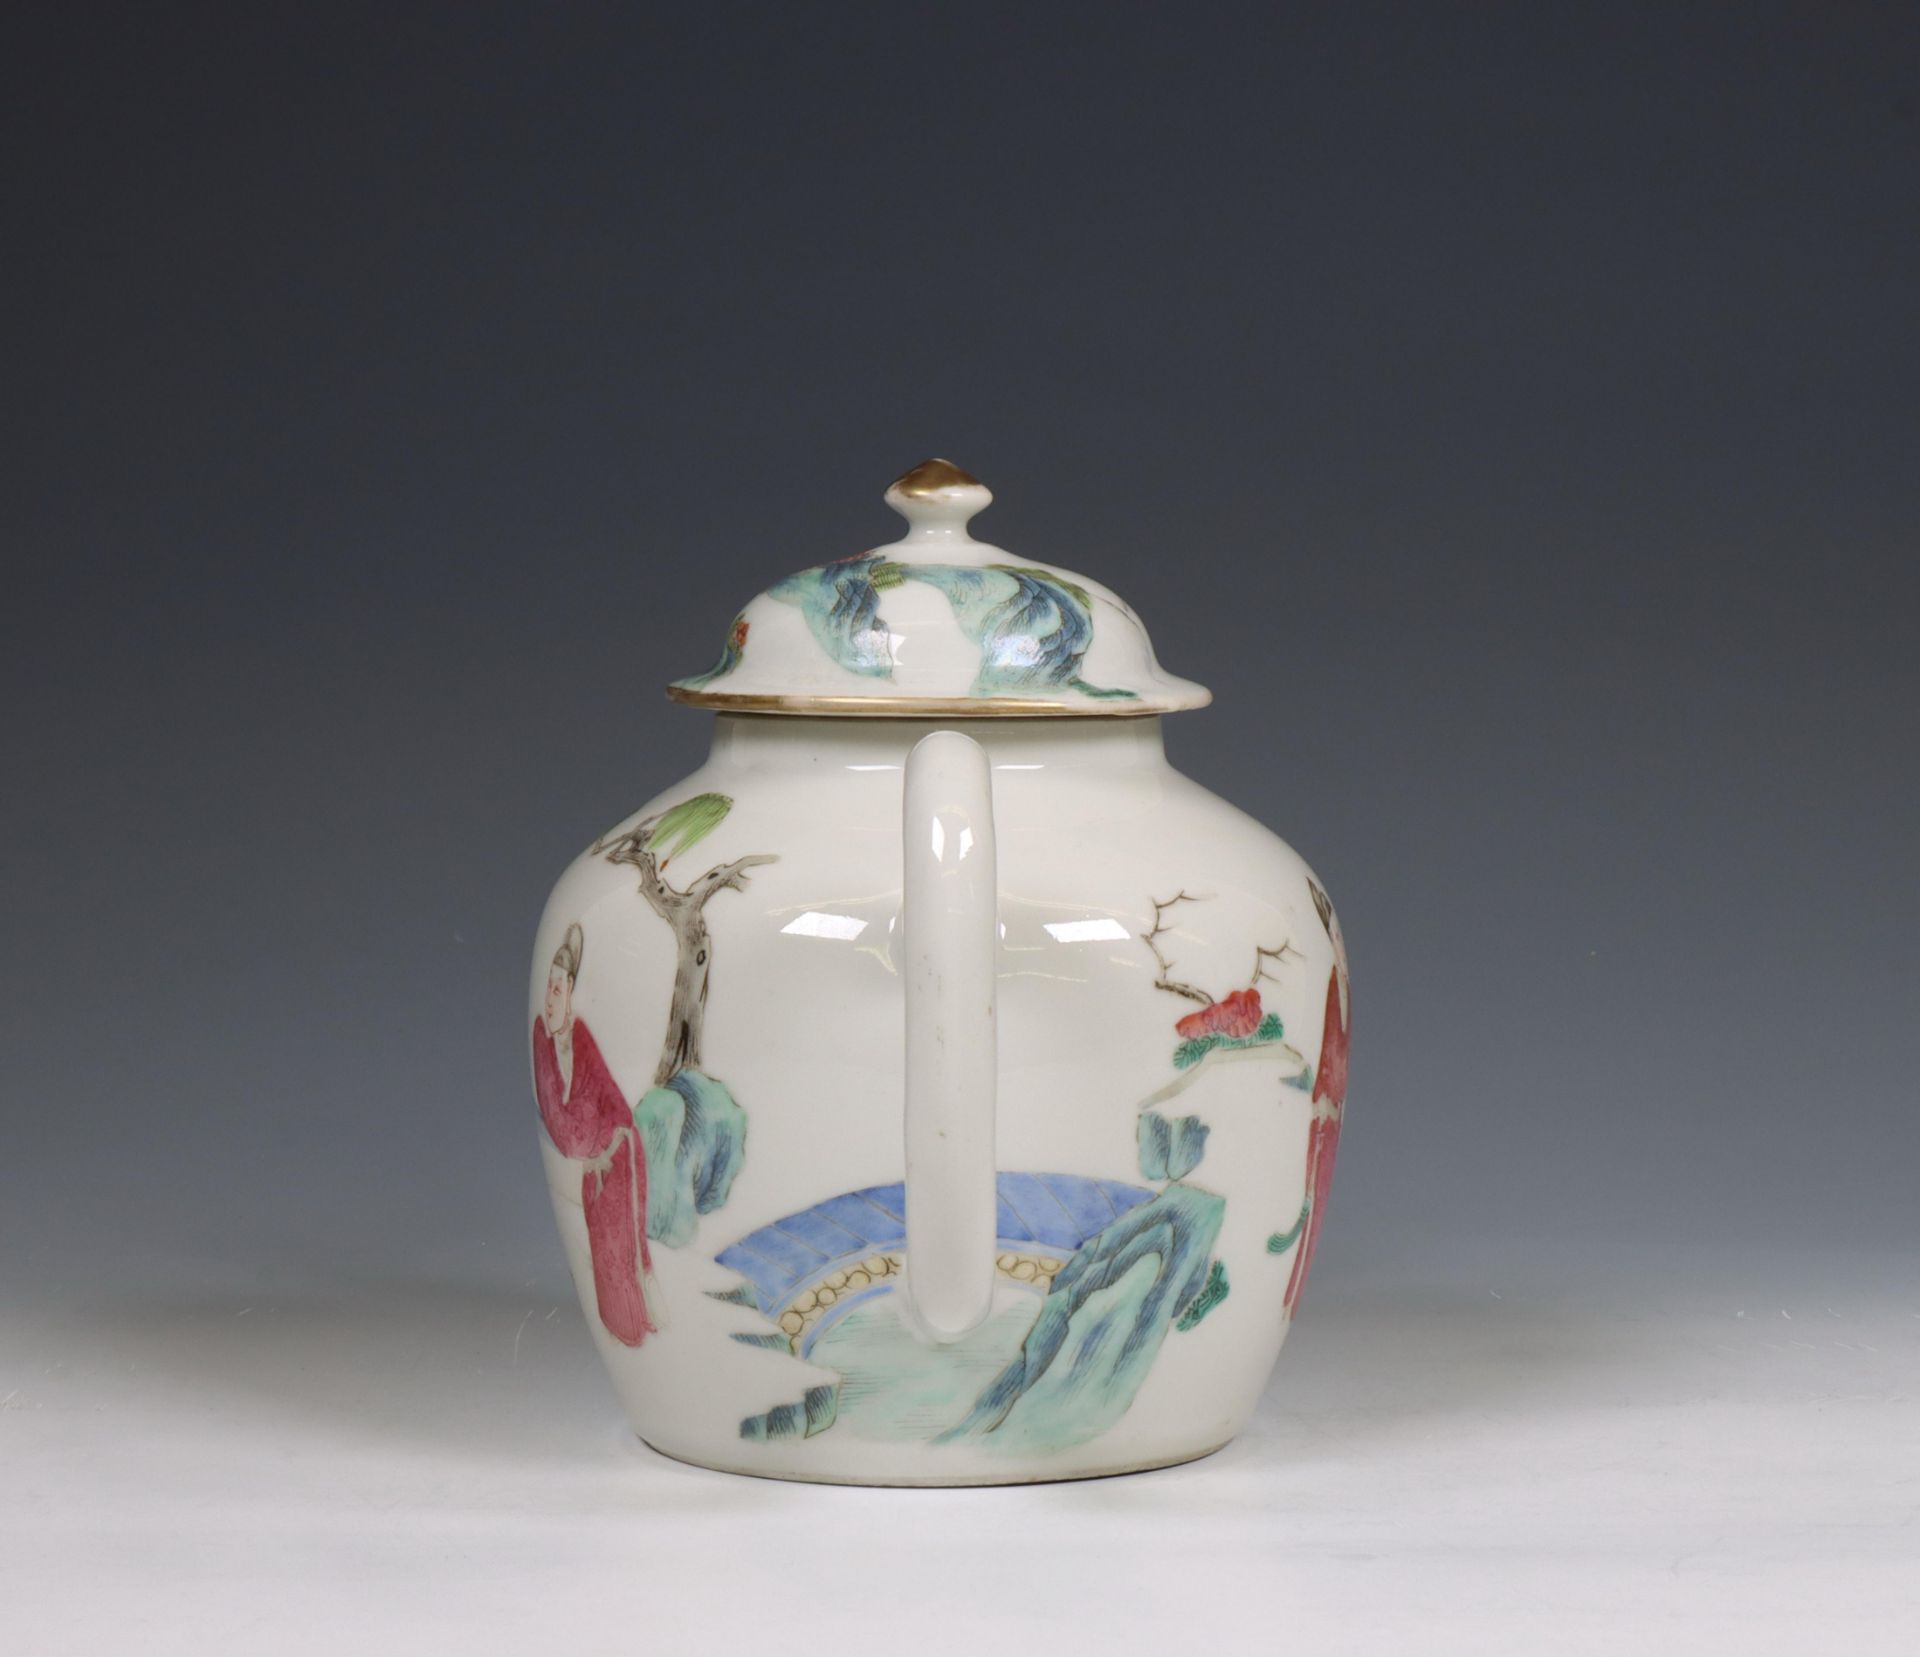 China, a famille rose porcelain teapot and cover, 19th century, - Image 6 of 6